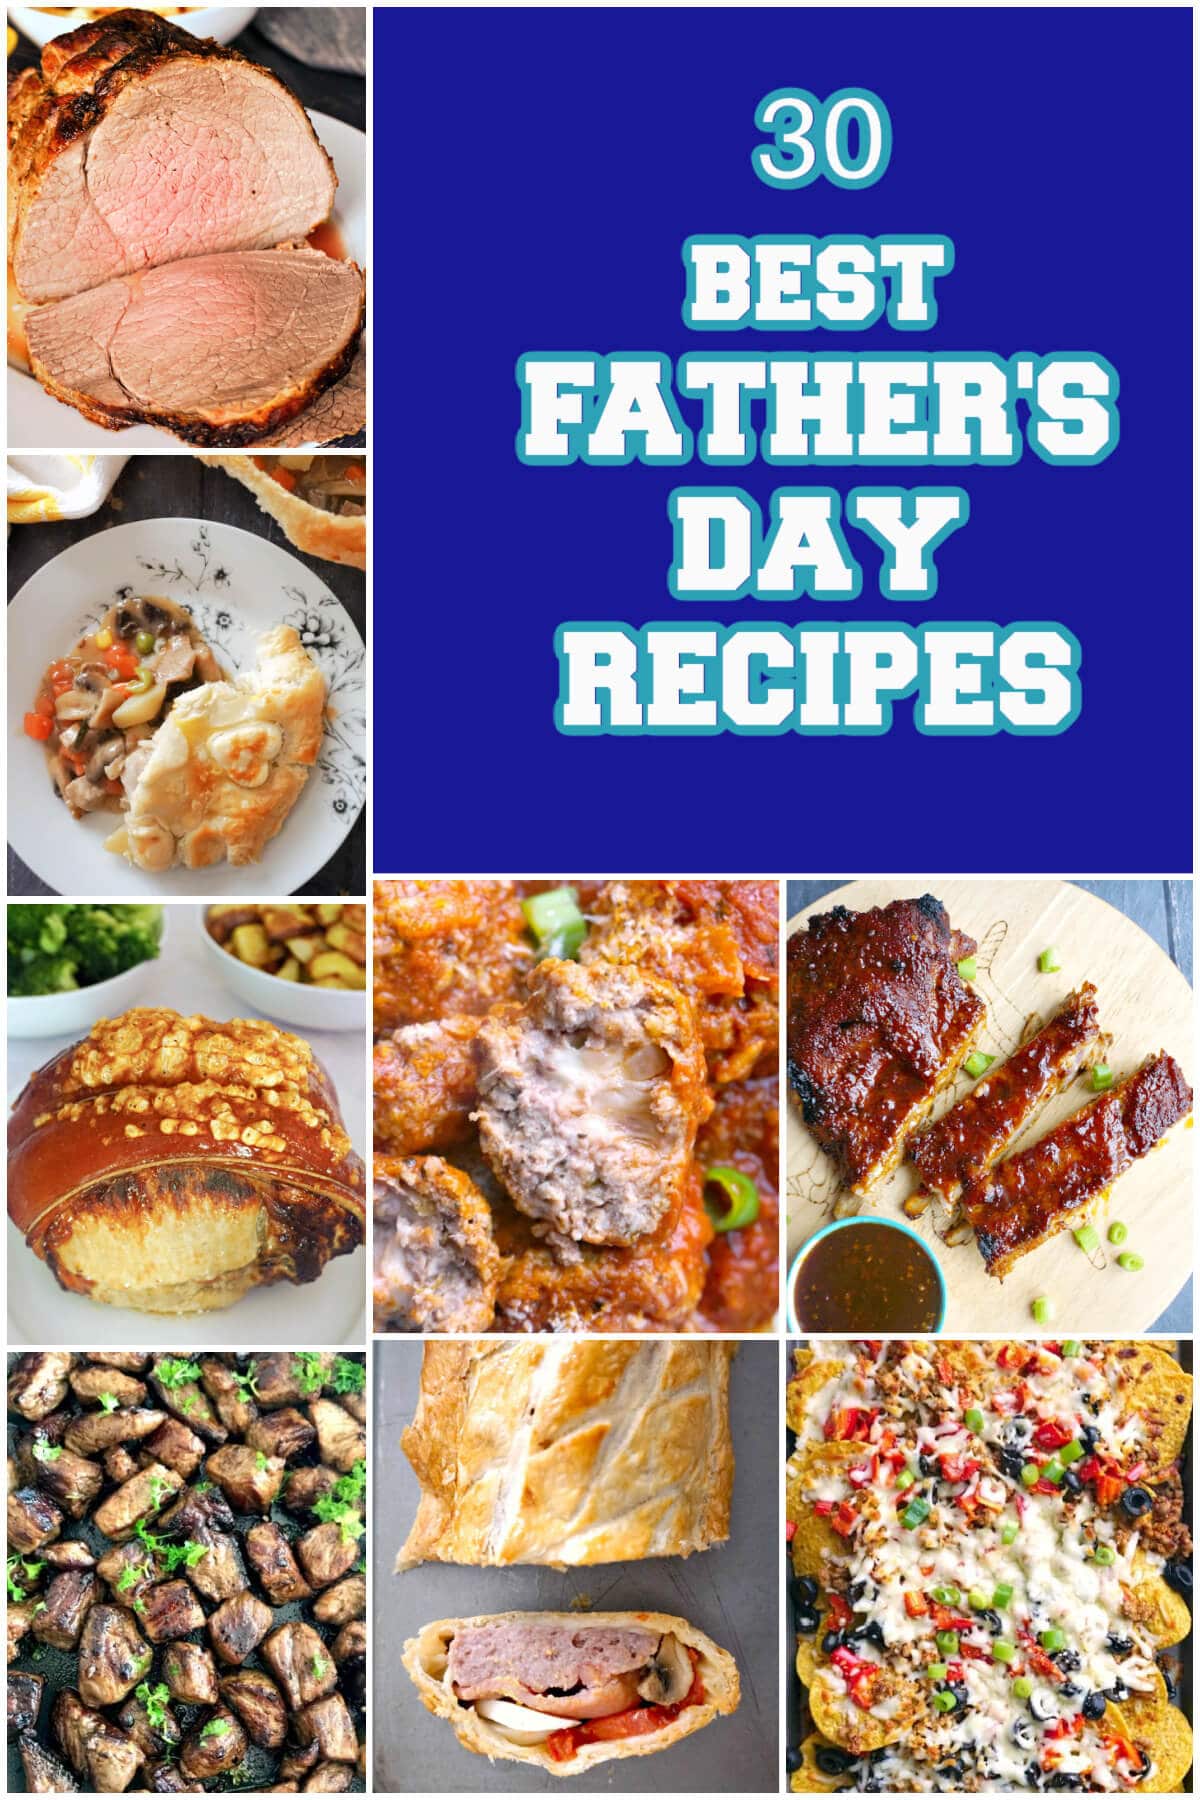 Recipes for Father's Day